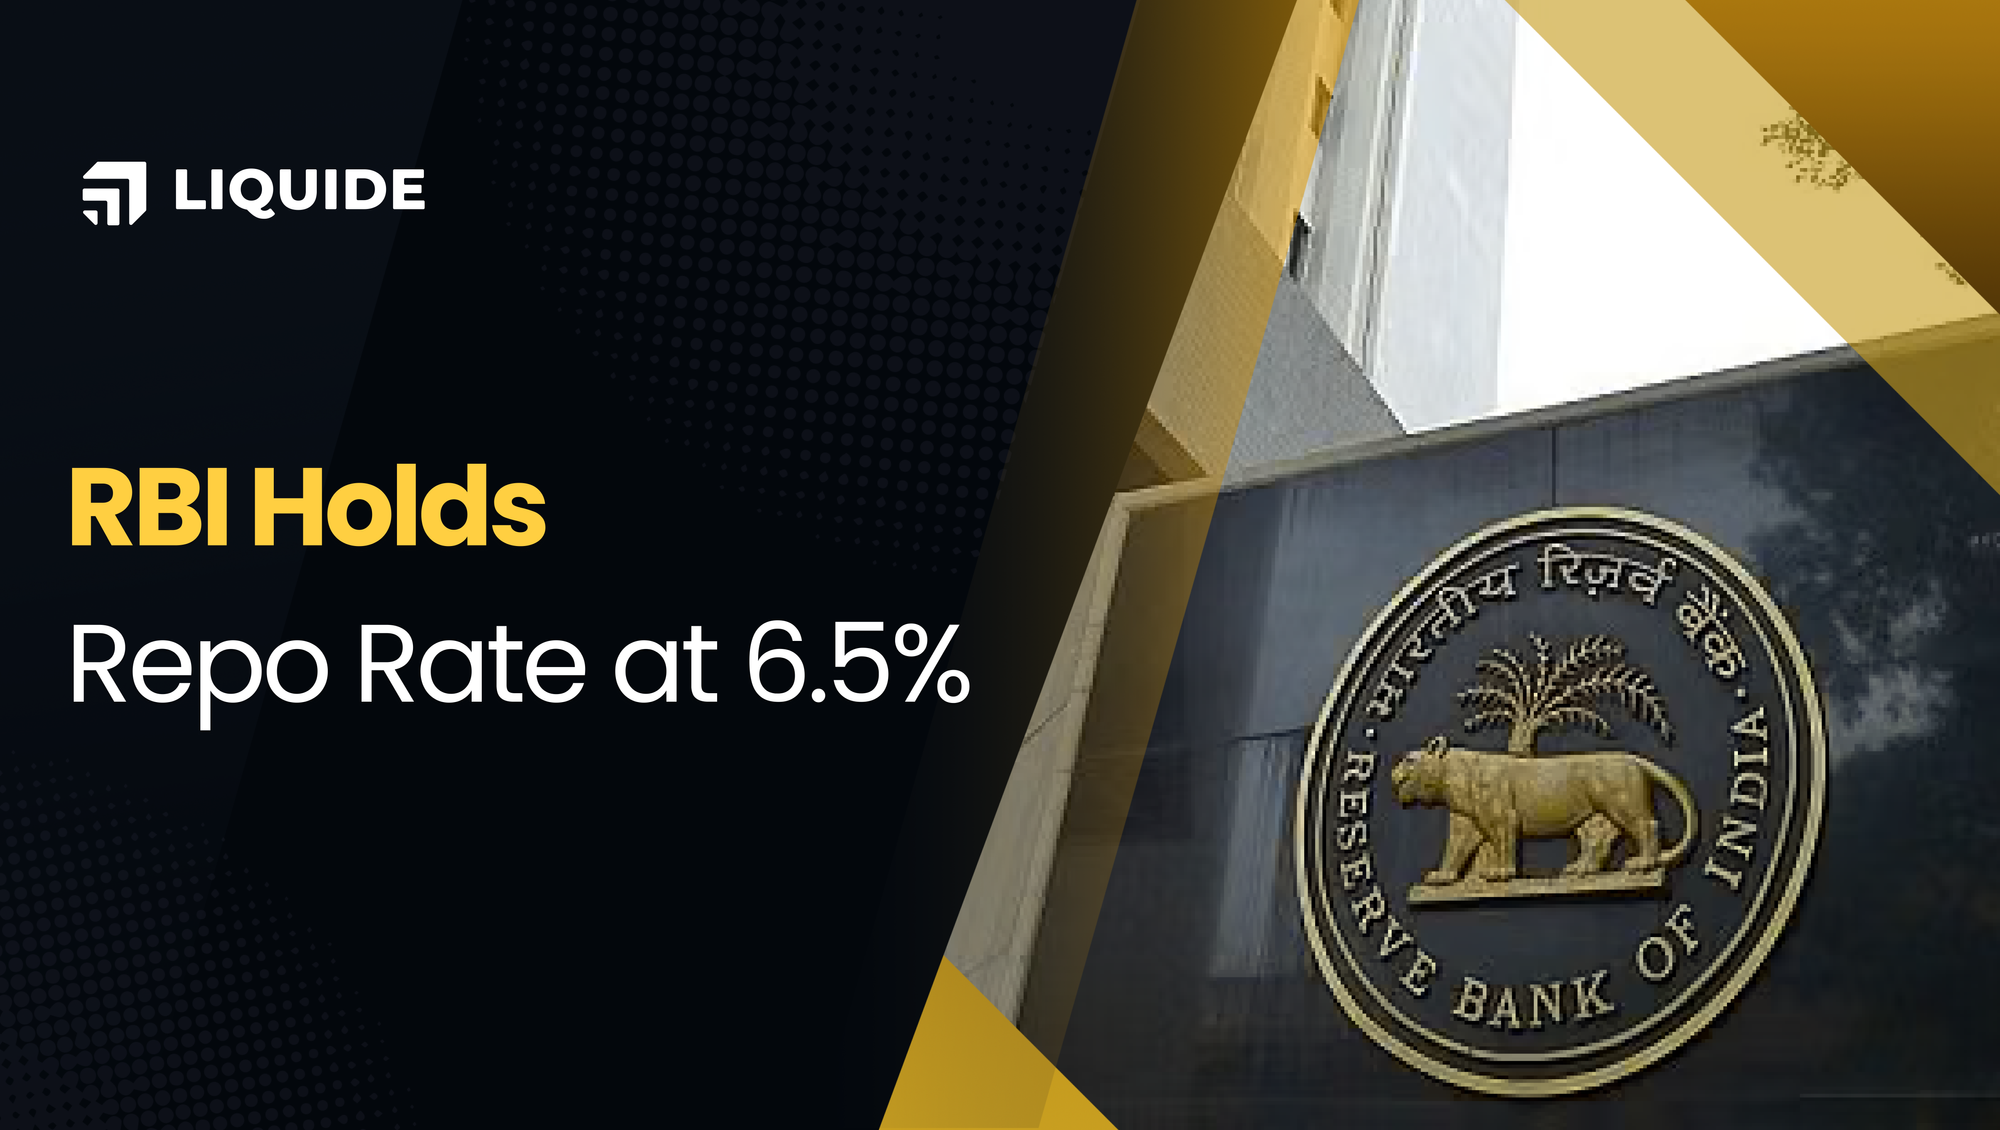 RBI Maintains Repo Rate at 6.5%: Analysing the Market's Positive Reaction